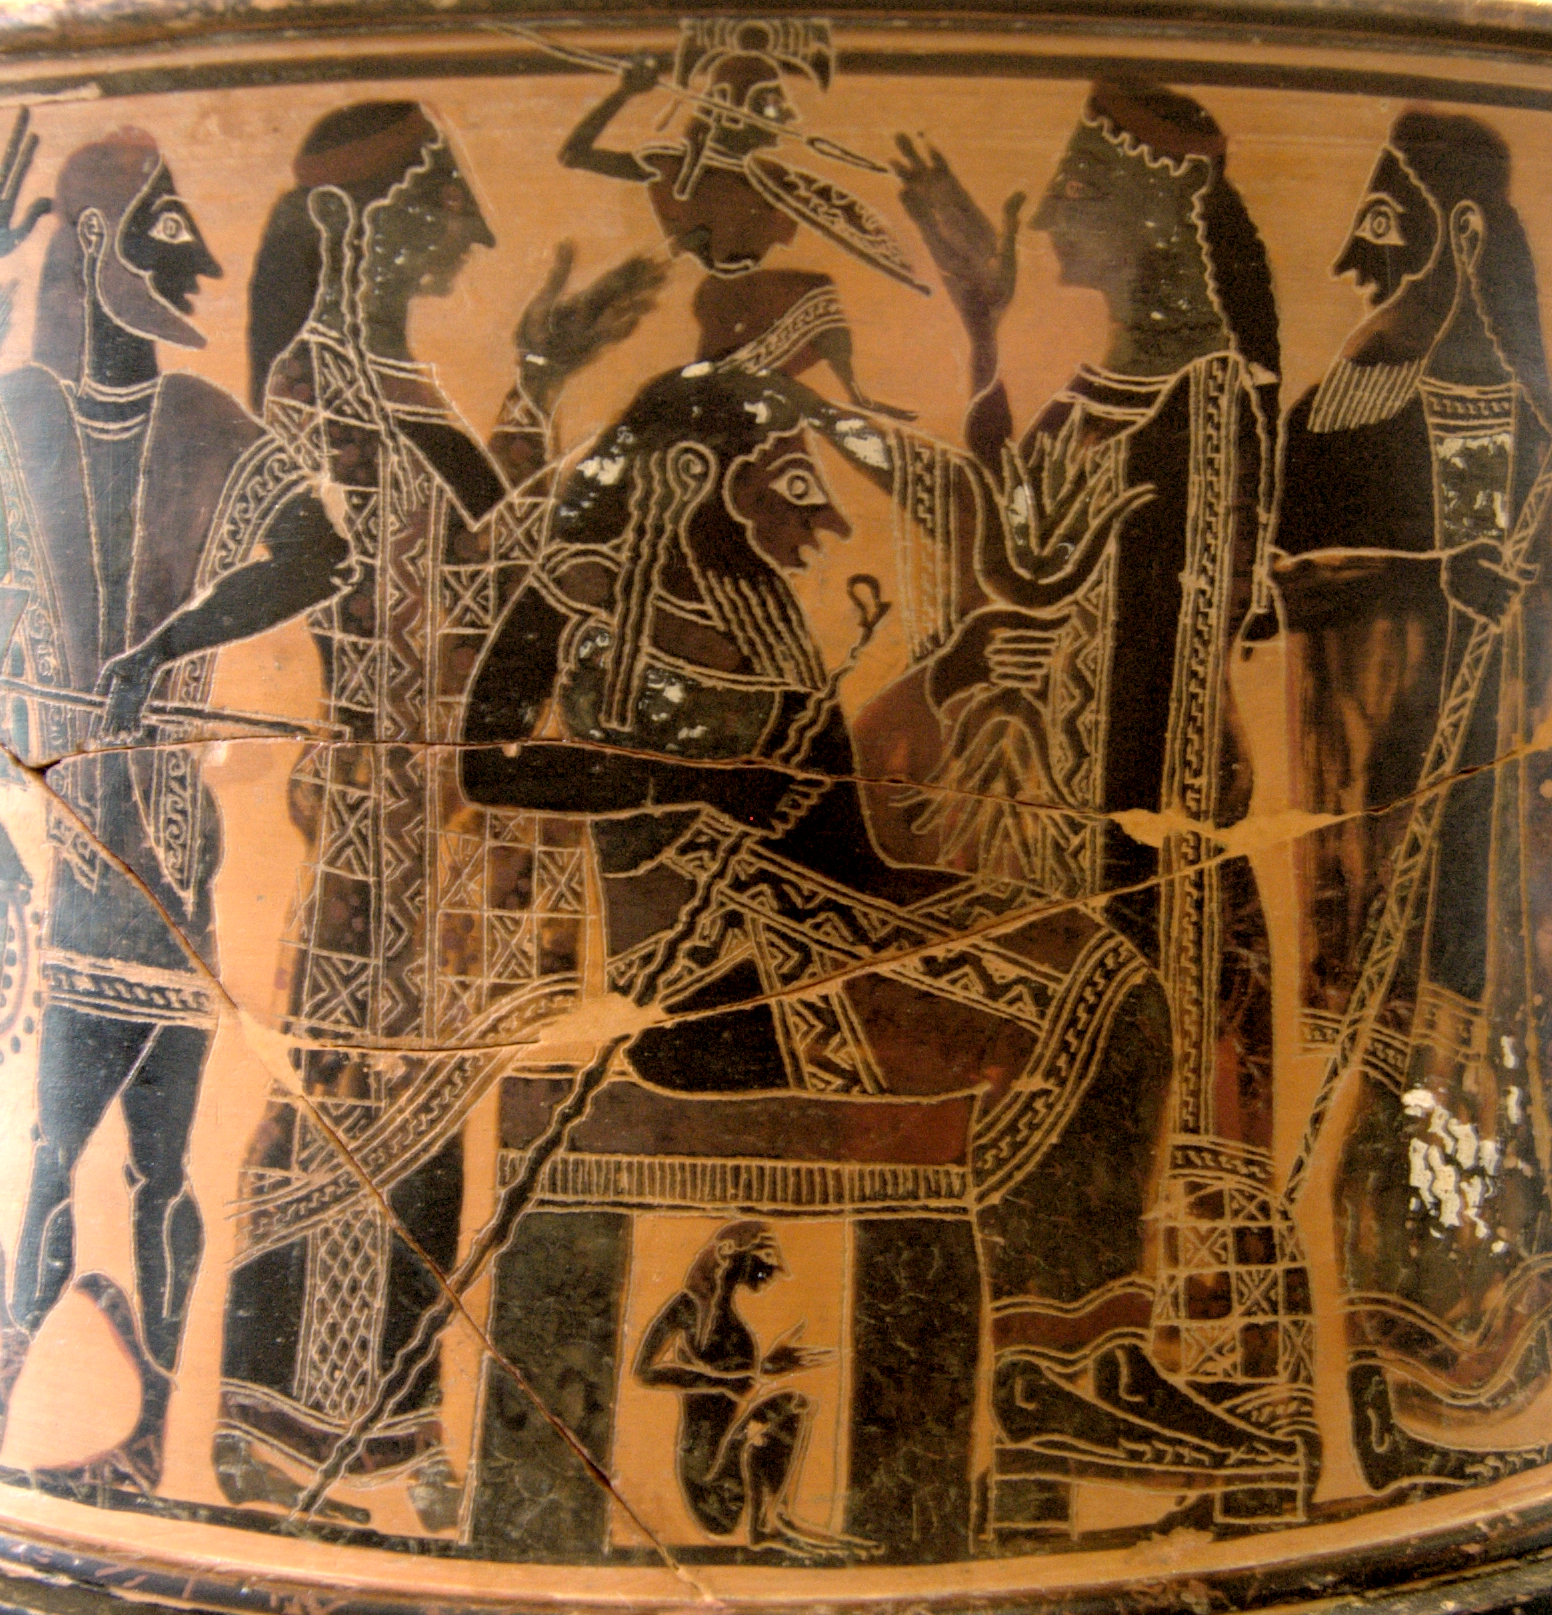 Zeus seated, with the small figure of Athena emerging from his head with a helm, shield, and spear. Other gods stand around Zeus.